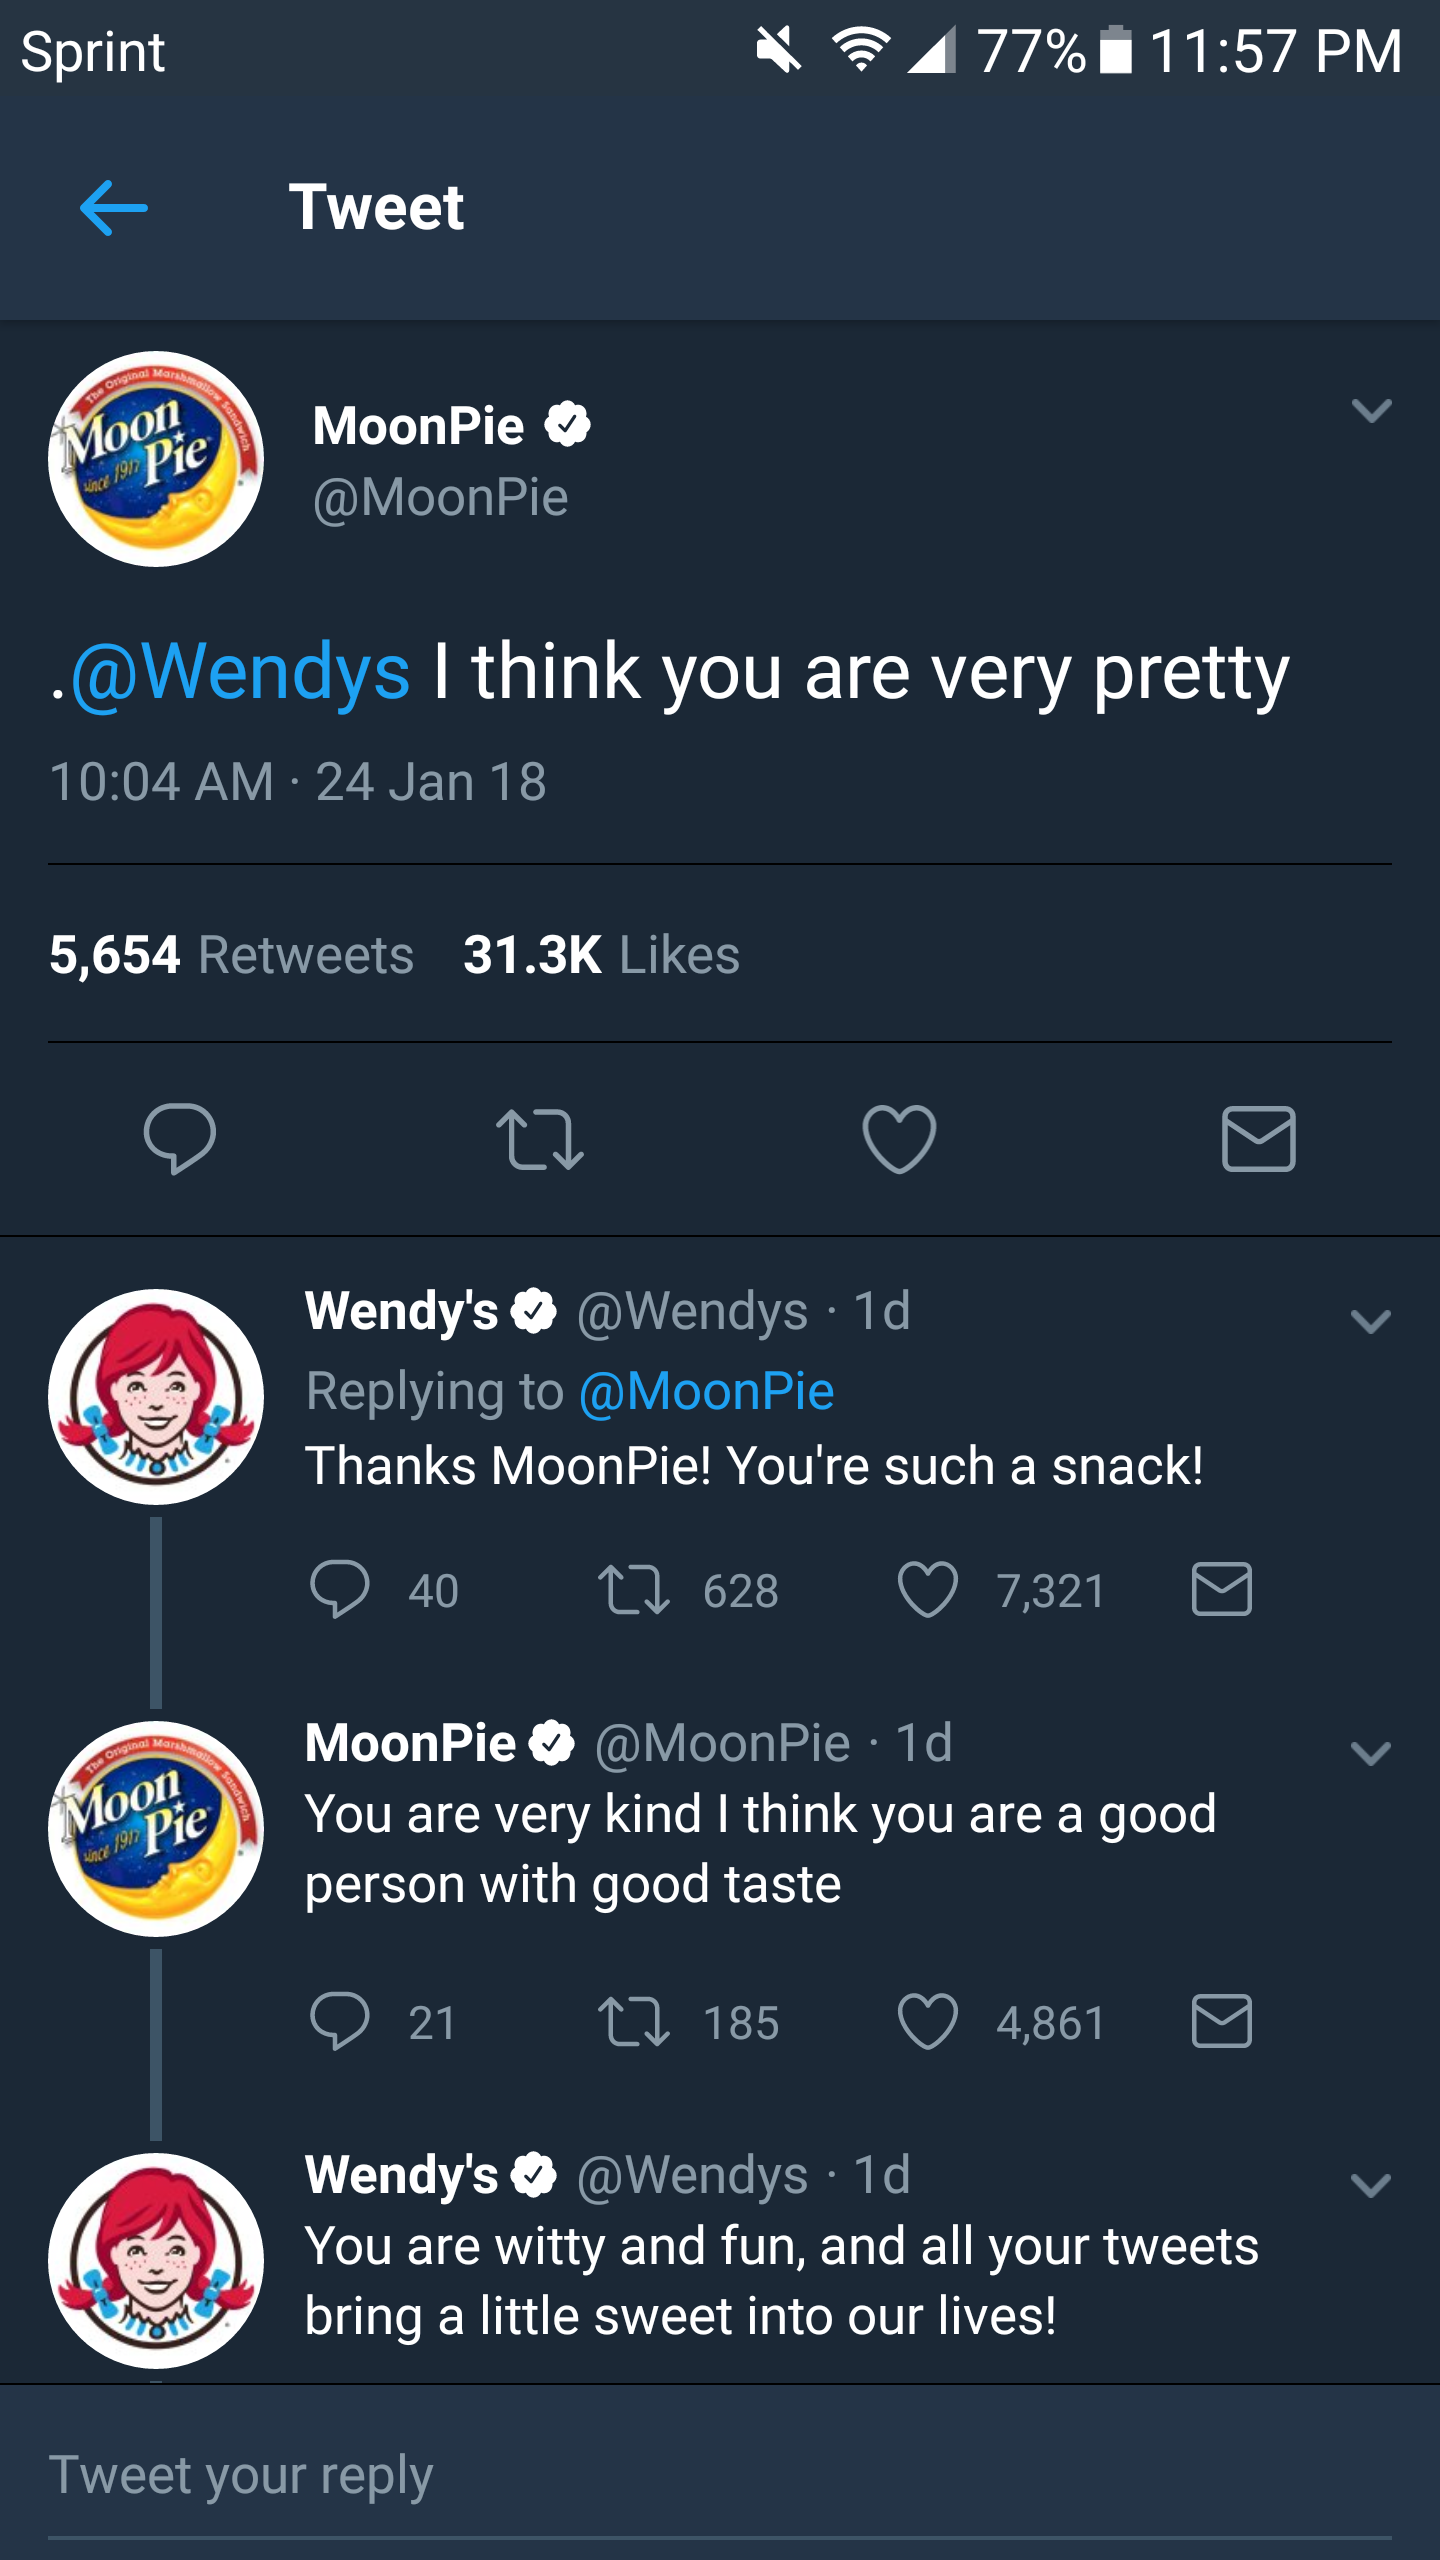 wendys and moonpie - Sprint 94 77% Tweet Bloxha MoonPie . I think you are very pretty 24 Jan 18 5,654 Wendy's 1d Pie Thanks MoonPie! You're such a snack! 40 7.6287,321 MoonPie You are very kind I think you are a good person with good taste O 21 185 4 ,861